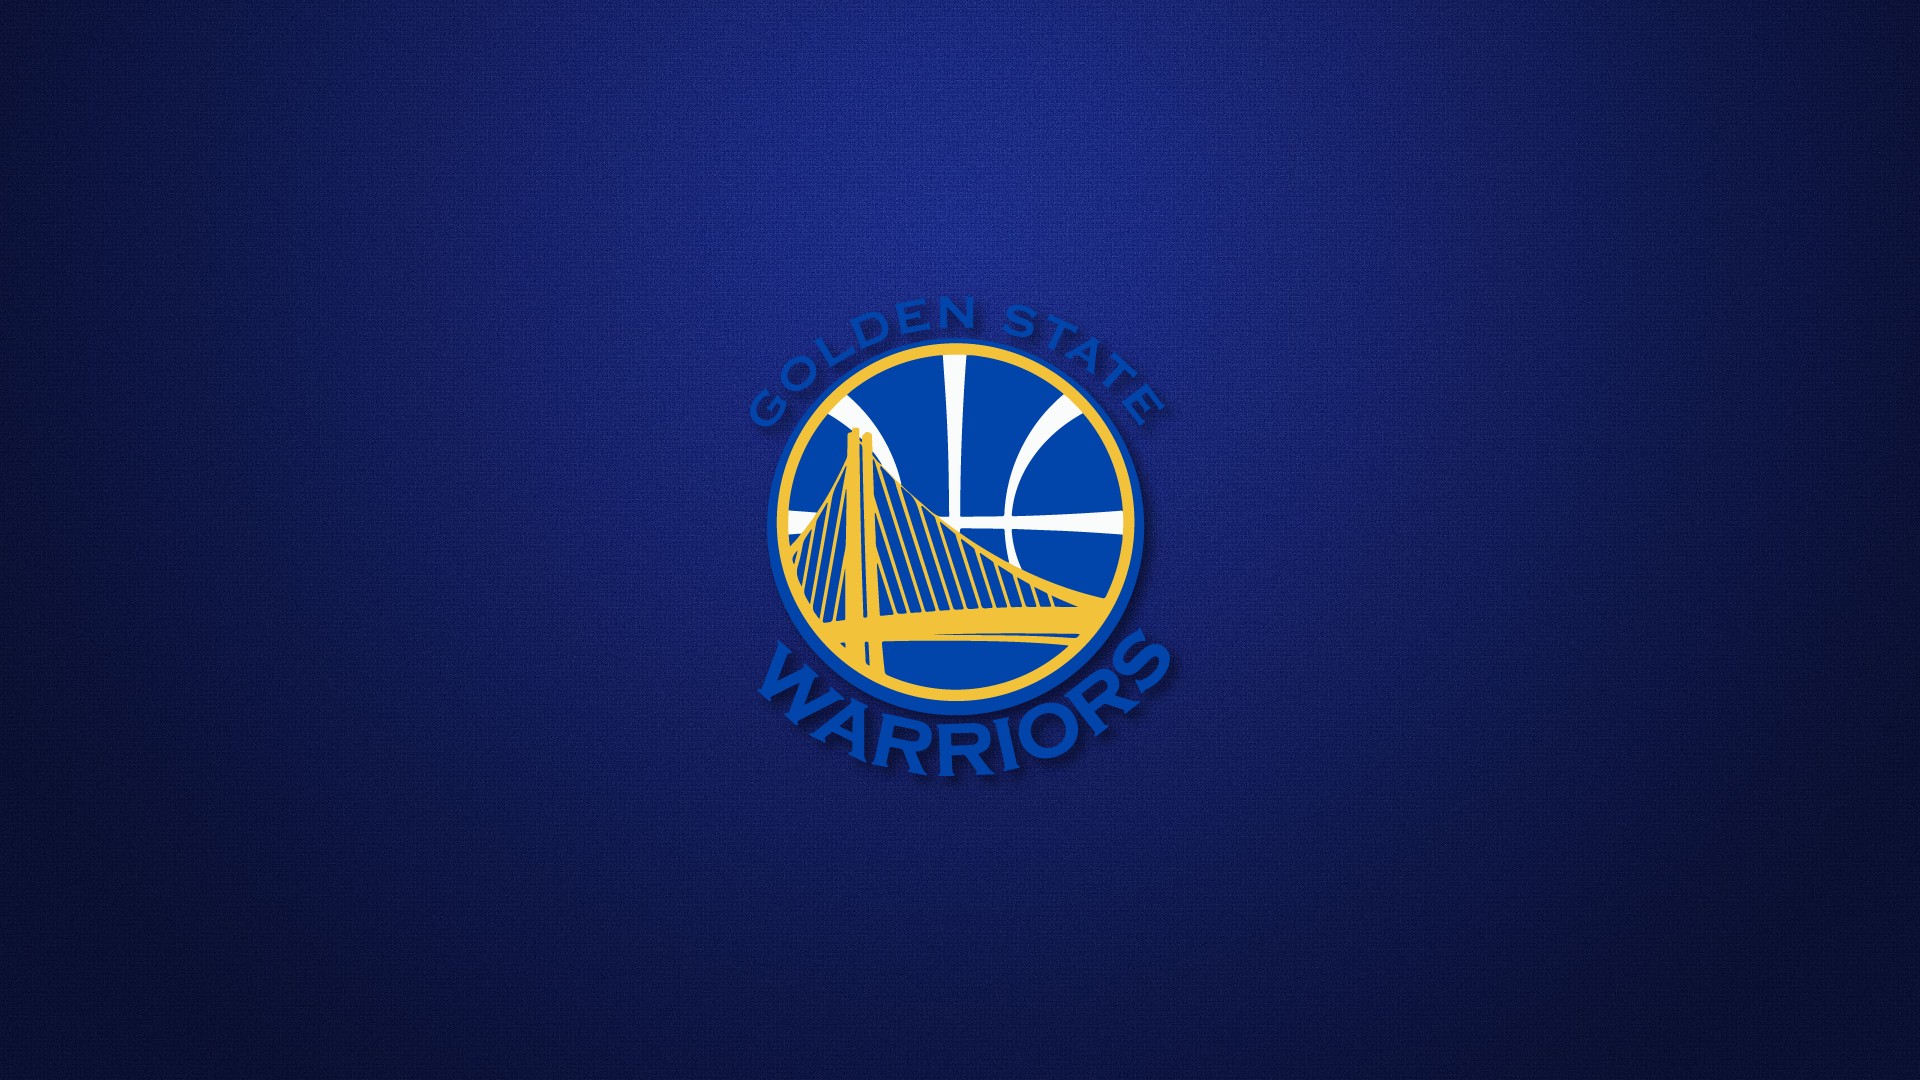 Golden State Basketball Wallpaper Hd With High-resolution - Golden State Warriors - HD Wallpaper 